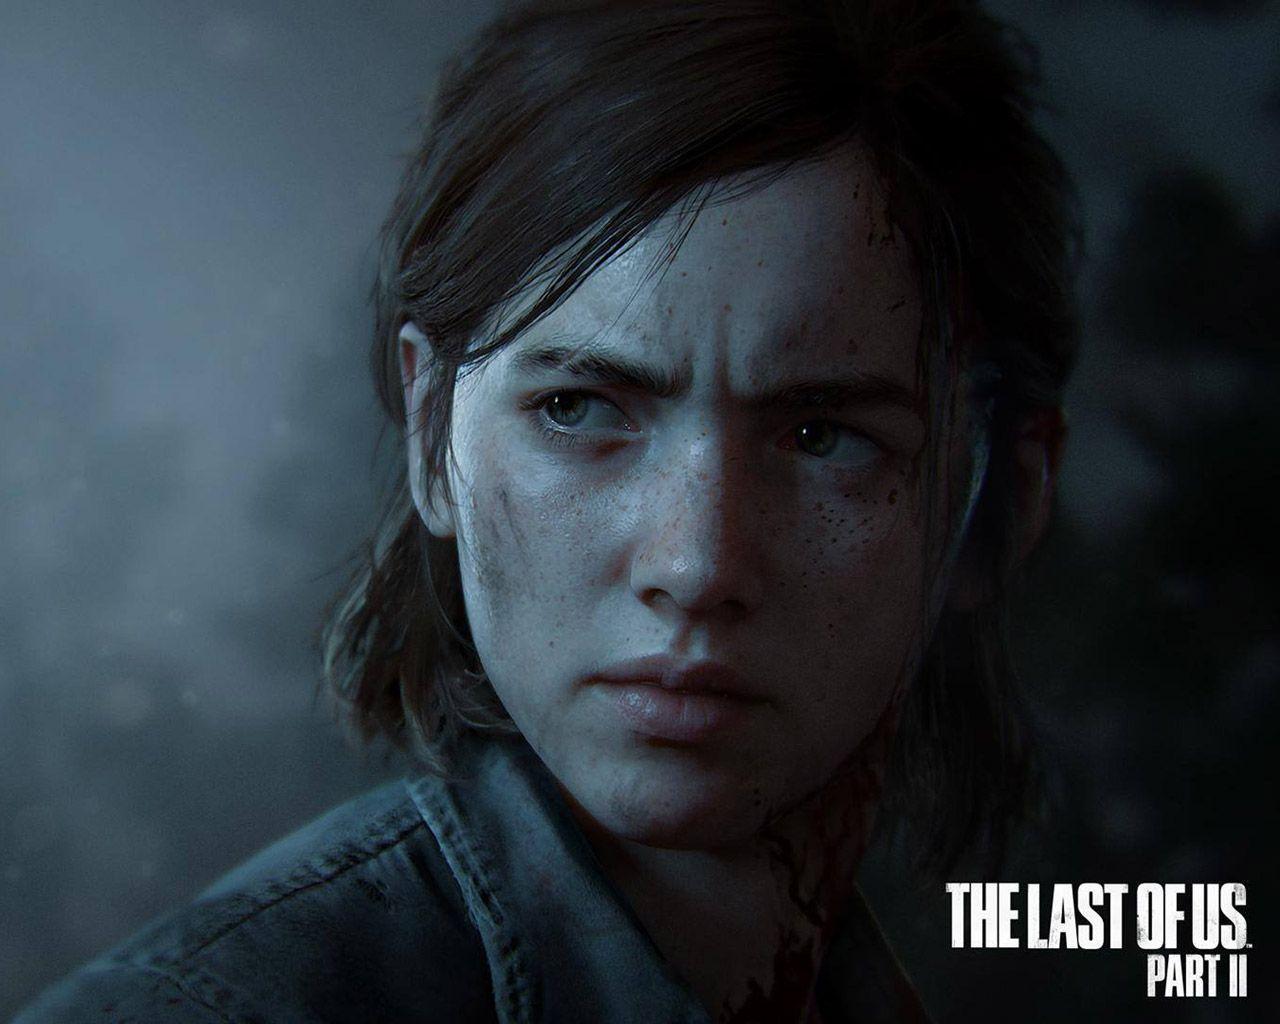 The Last of Us 2 Wallpaper Free The Last of Us 2 Background